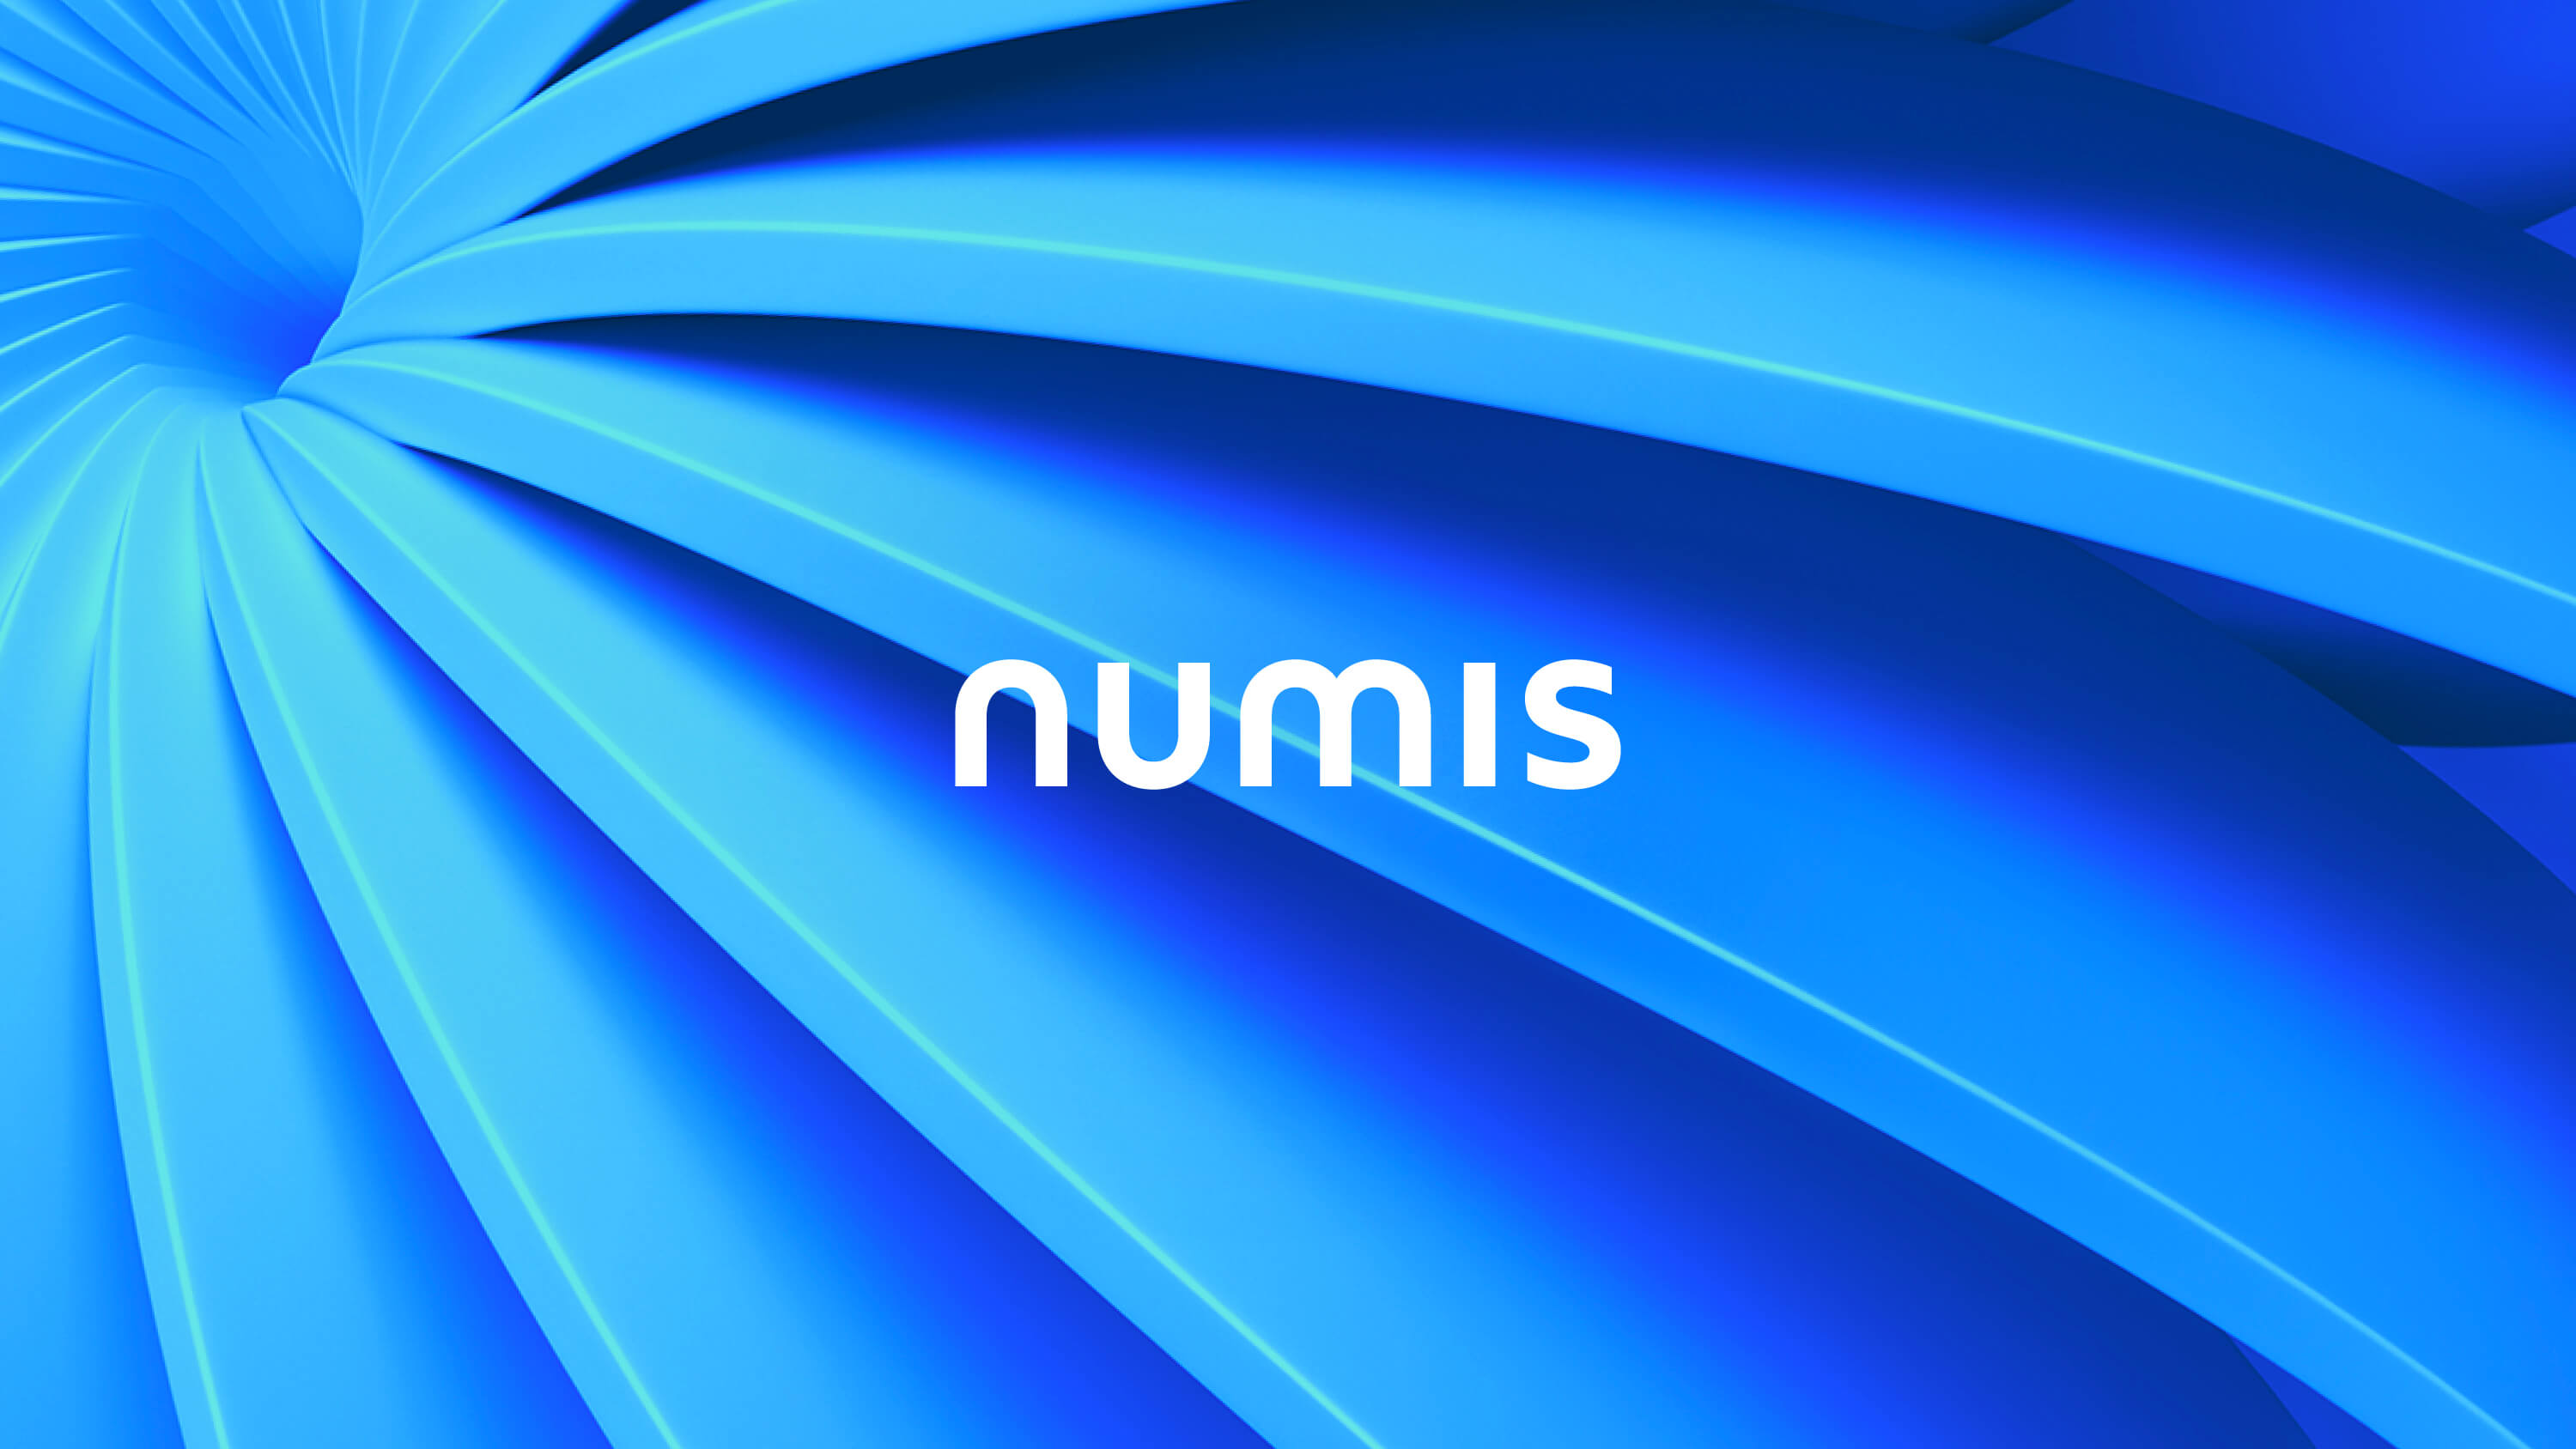 Numis Partners with Designhouse on Fresh Brand Identity, Opening Doors to New Markets